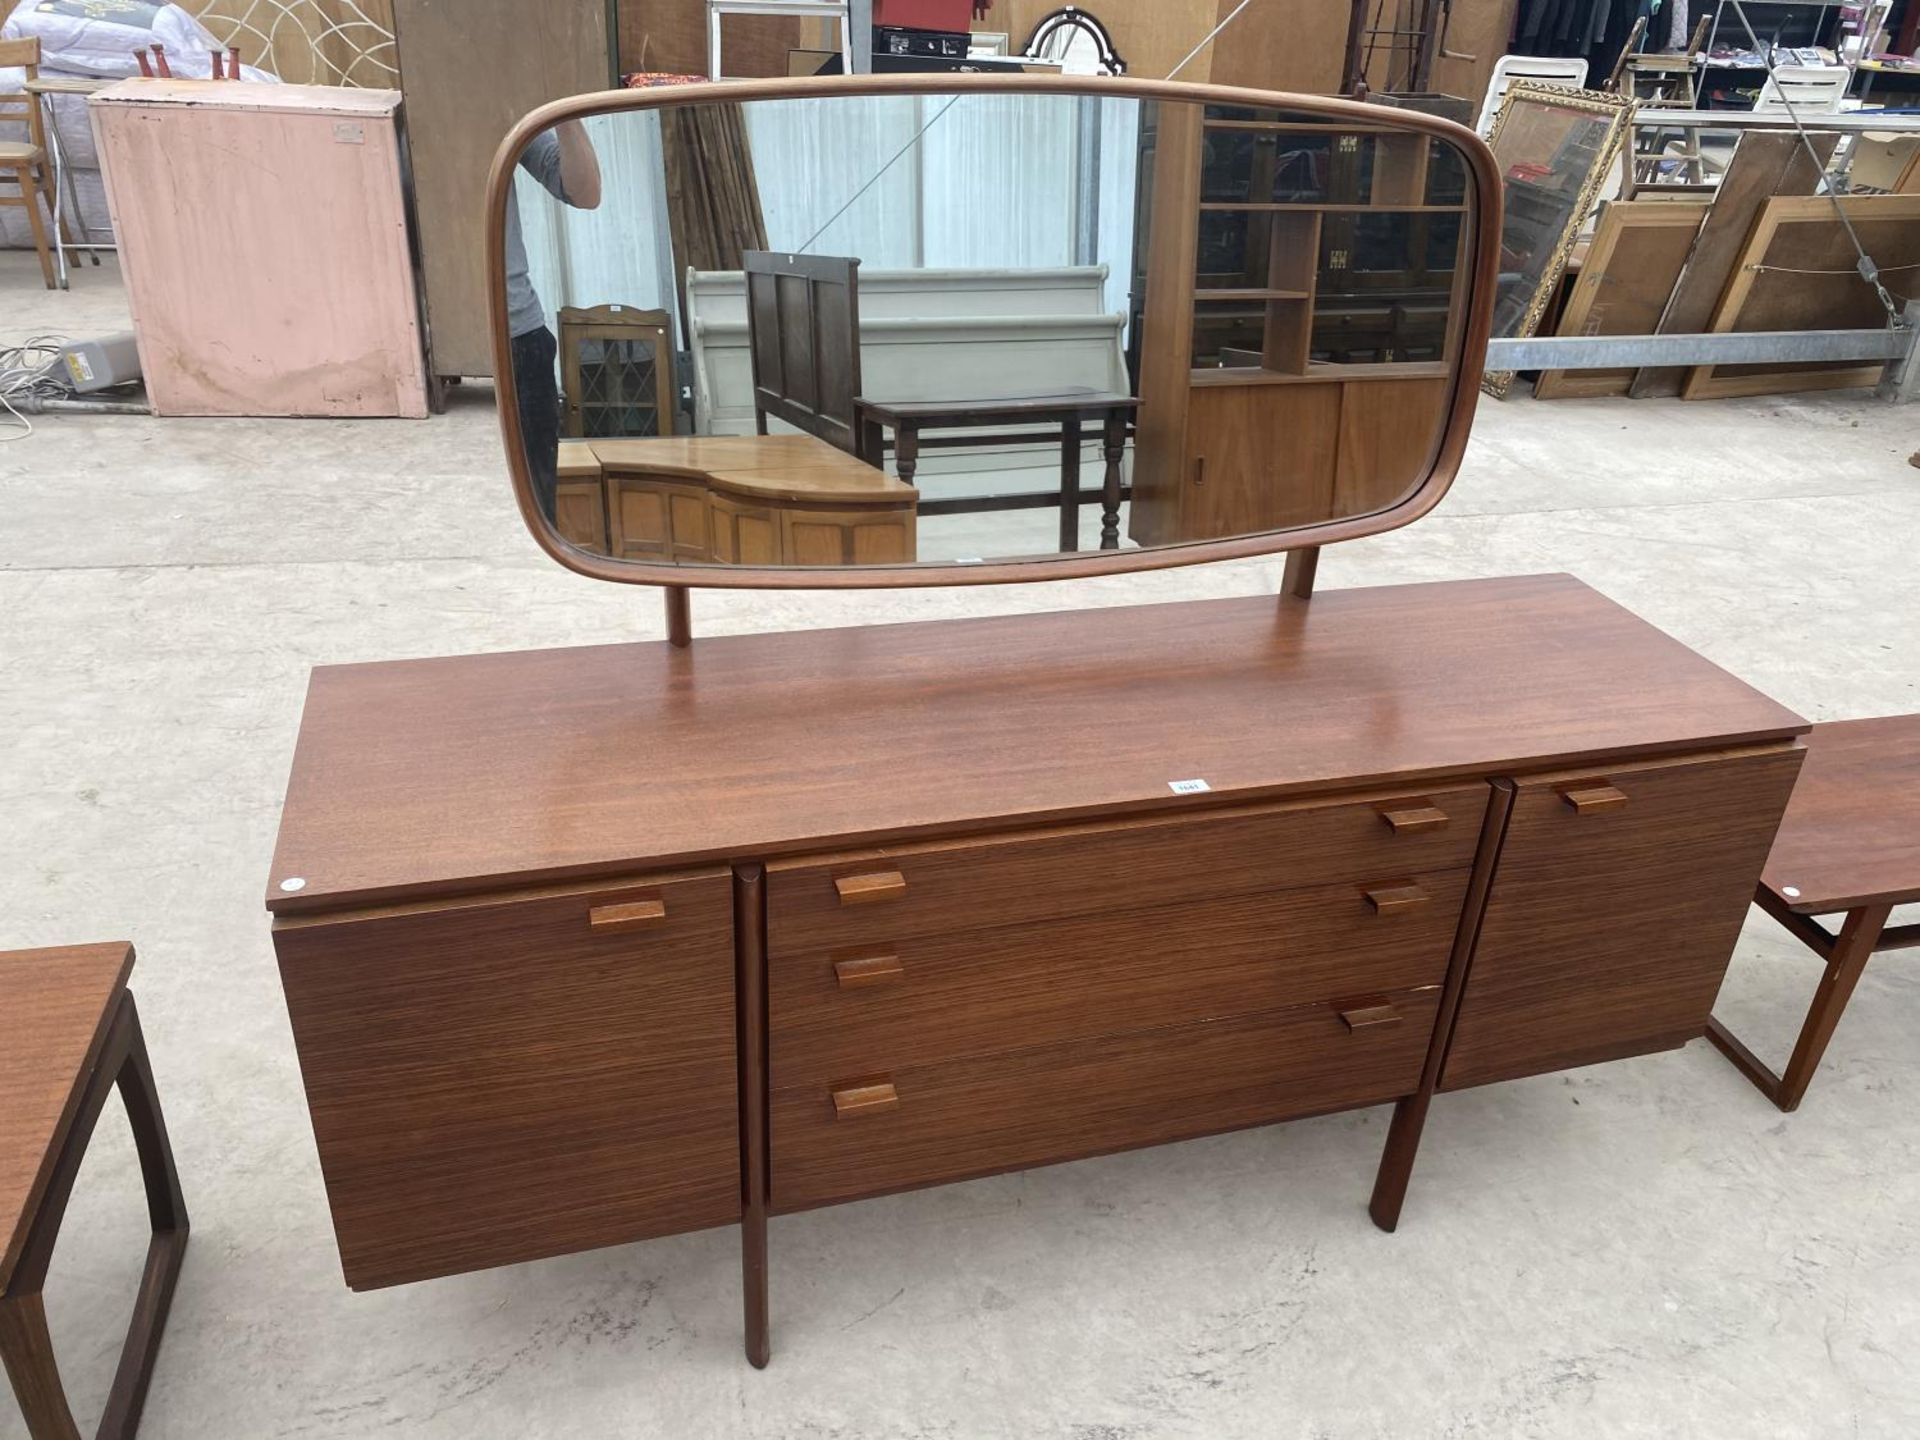 A TEAK DRESSING TABLE WITH TWO DOORS, THREE DRAWERS AND UPPER MIRROR